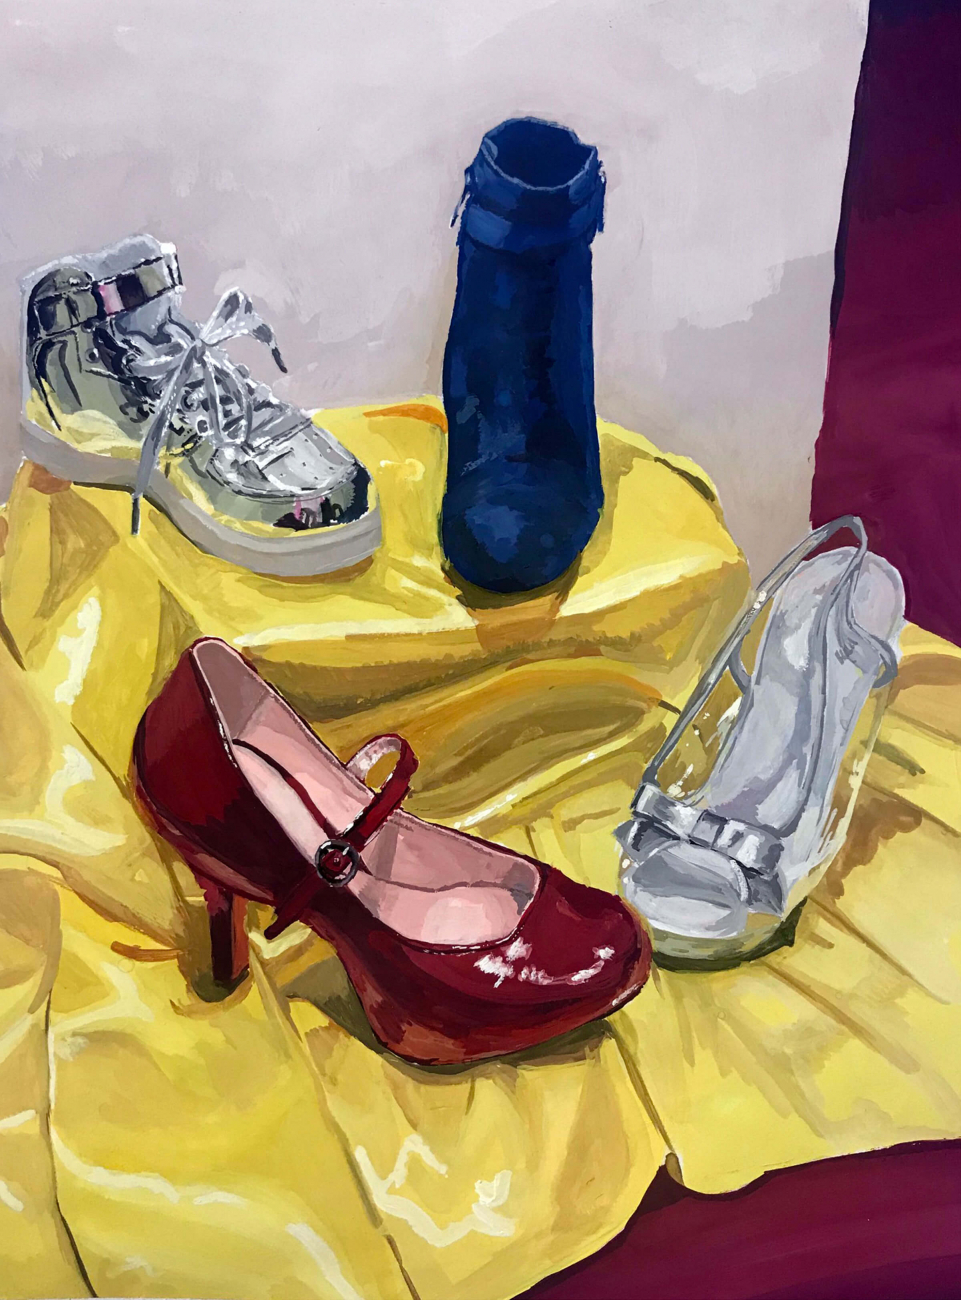 Various shoes, including high-heeled red and sliver, on a yellow cloth